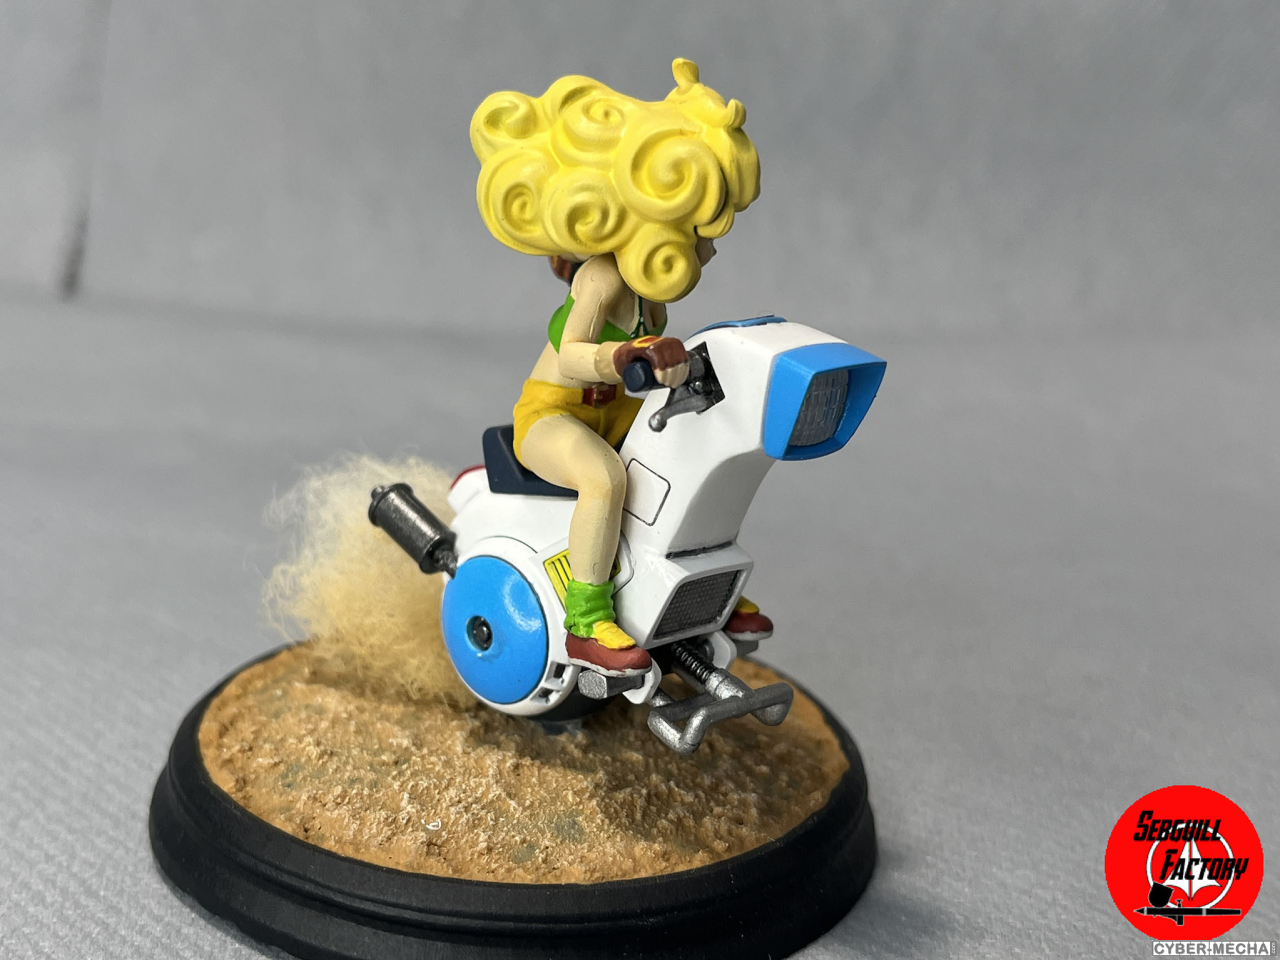 Dragon ball mecha collection 3 Lunch’s one wheel motorcycle 1678634510